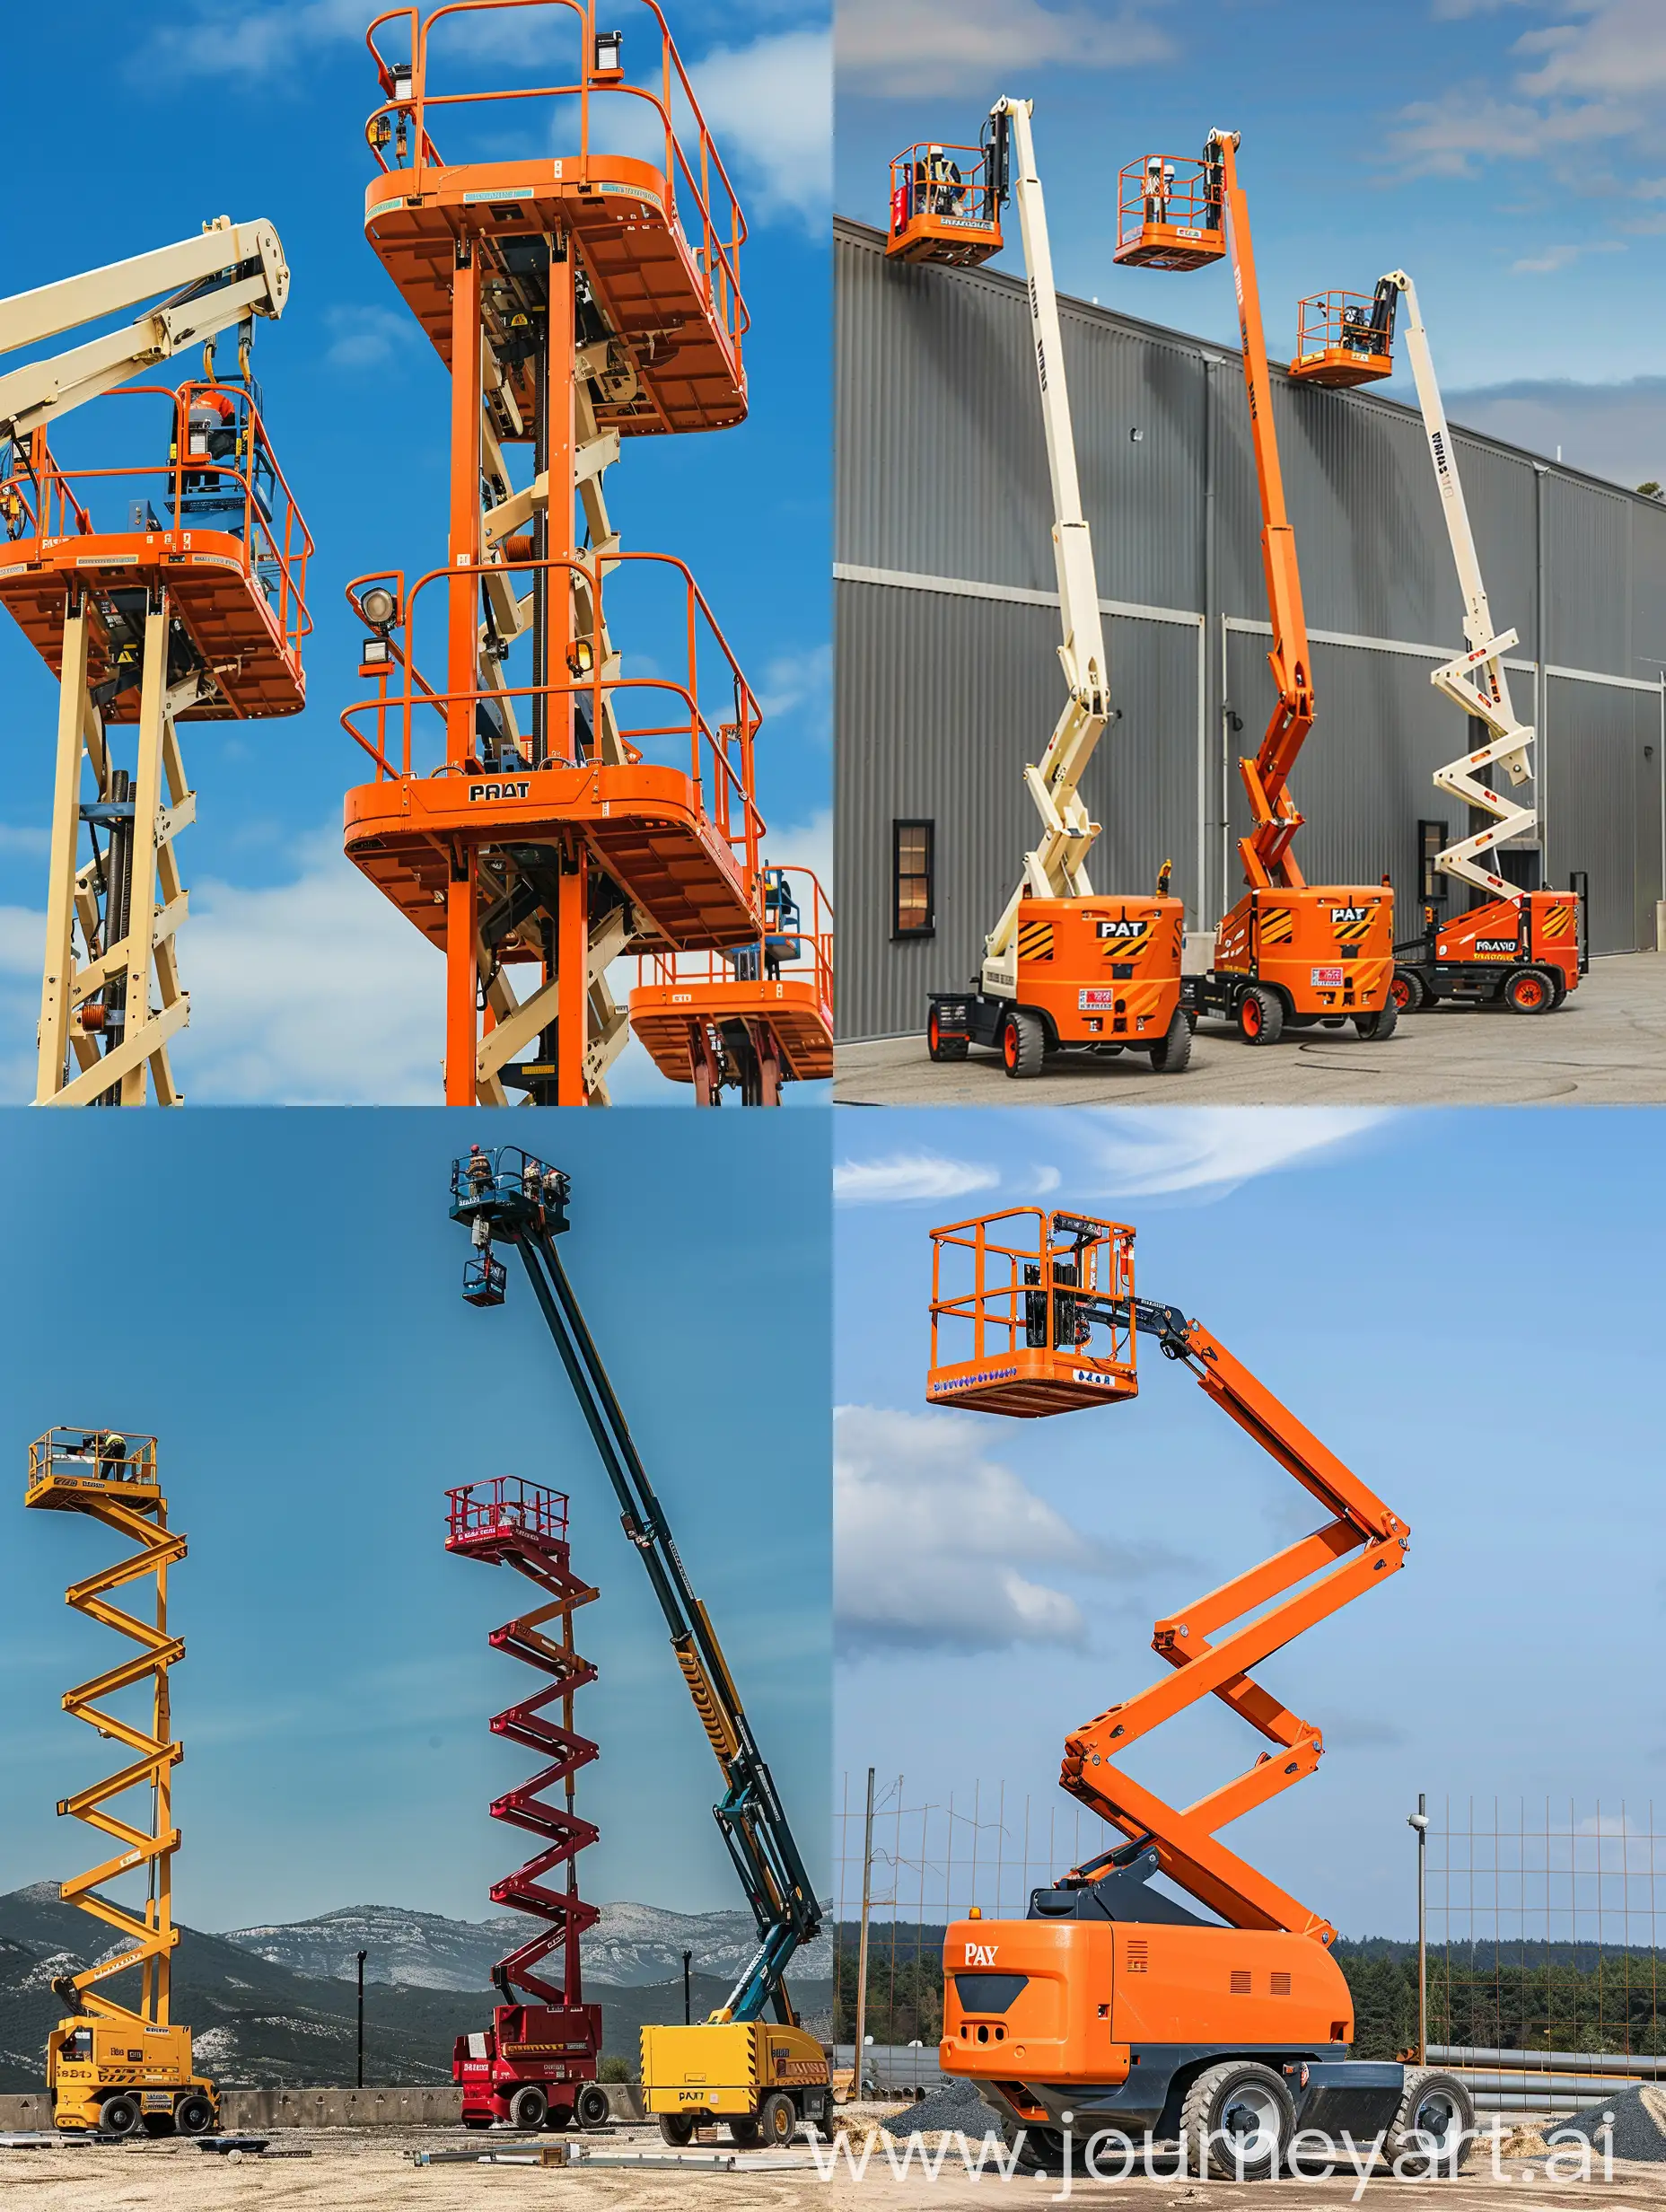 Professional-Aerial-Work-Platforms-in-Action